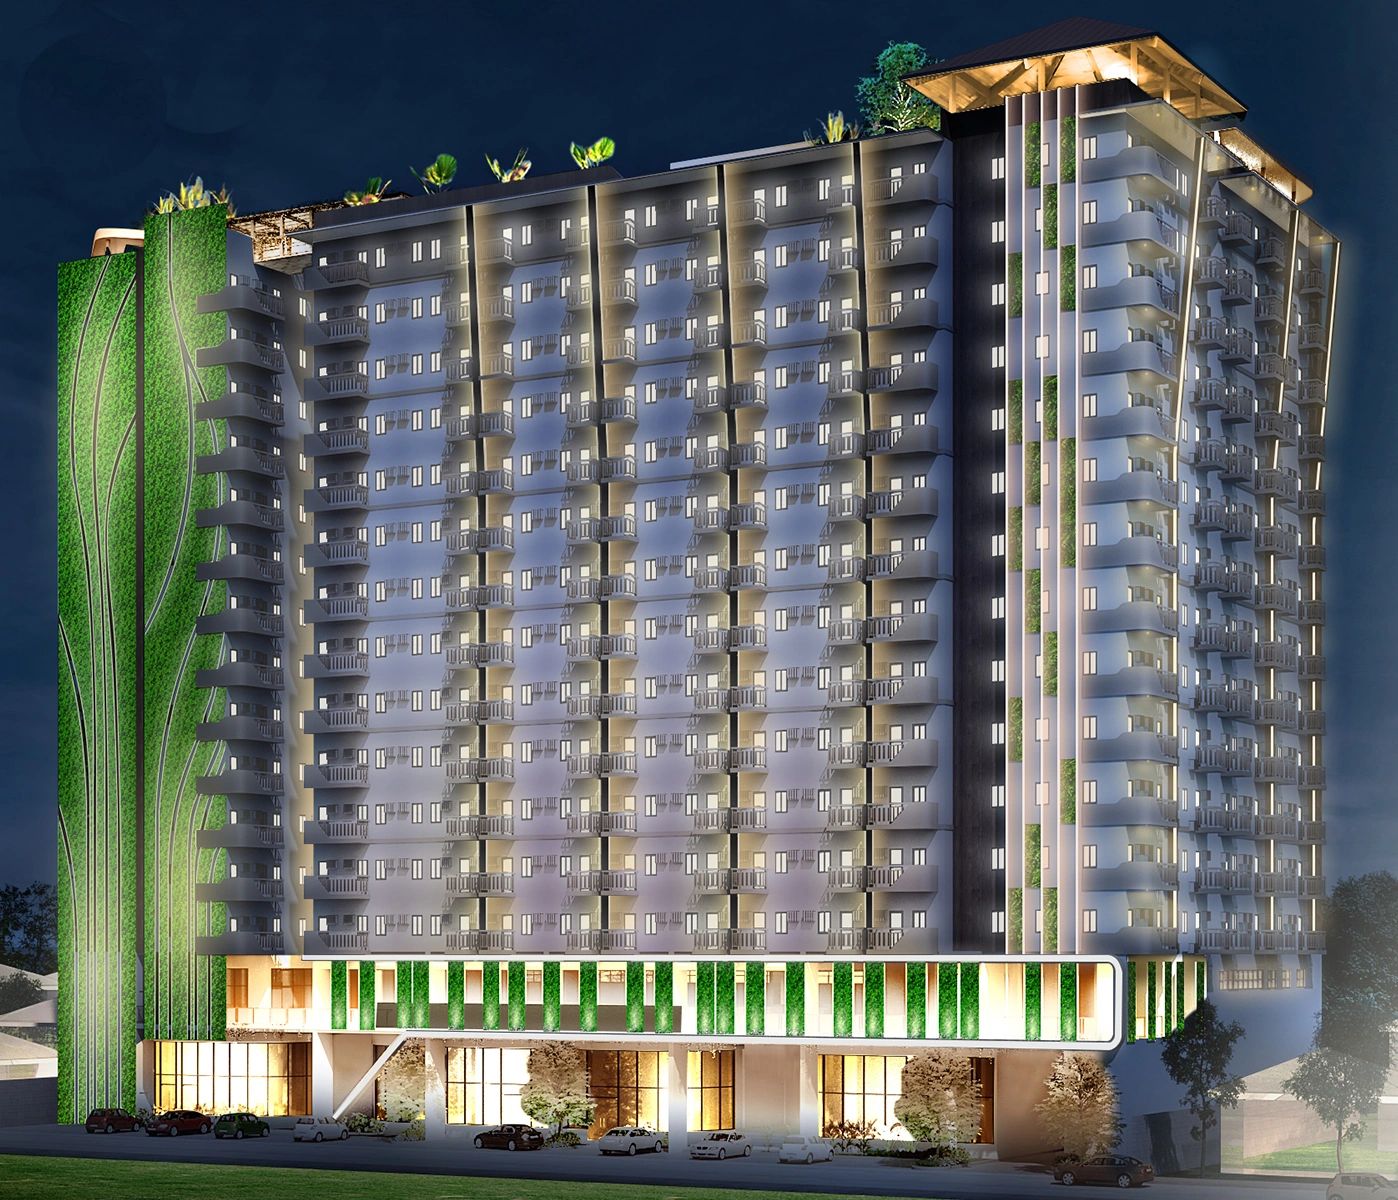 Grand Mesa Residences Night Perspective